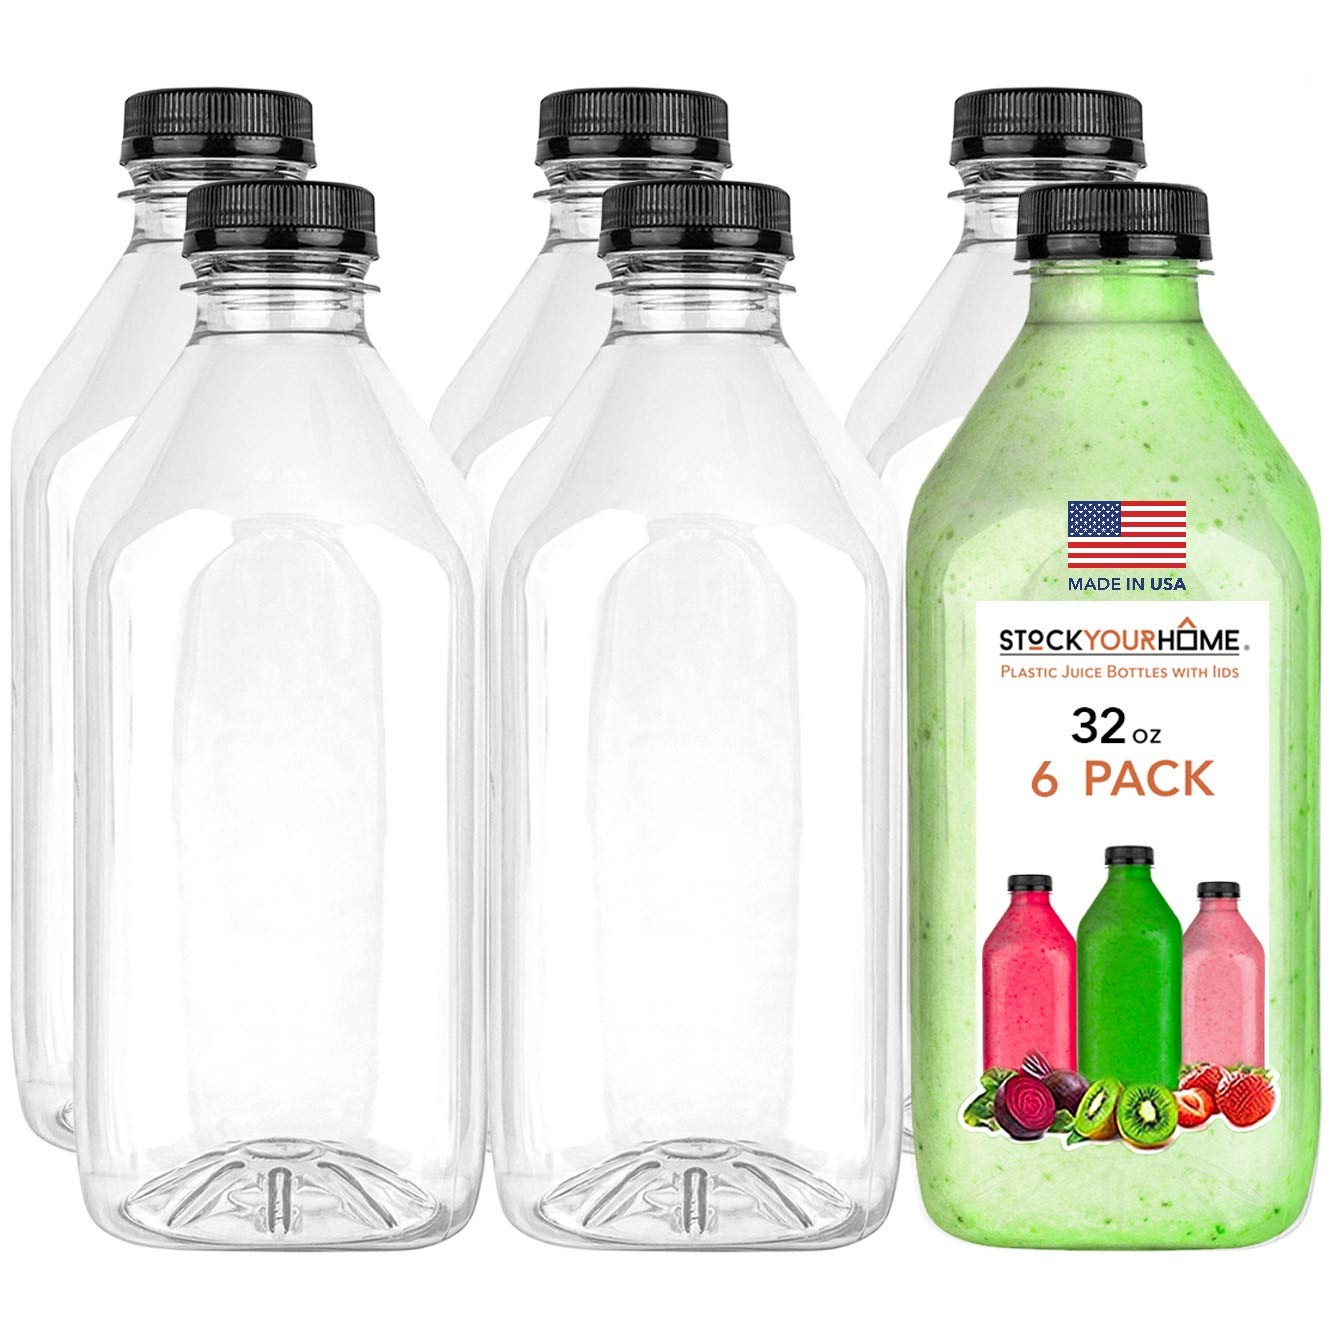  Reusable Clear Juice Bottles with Caps for Juicing